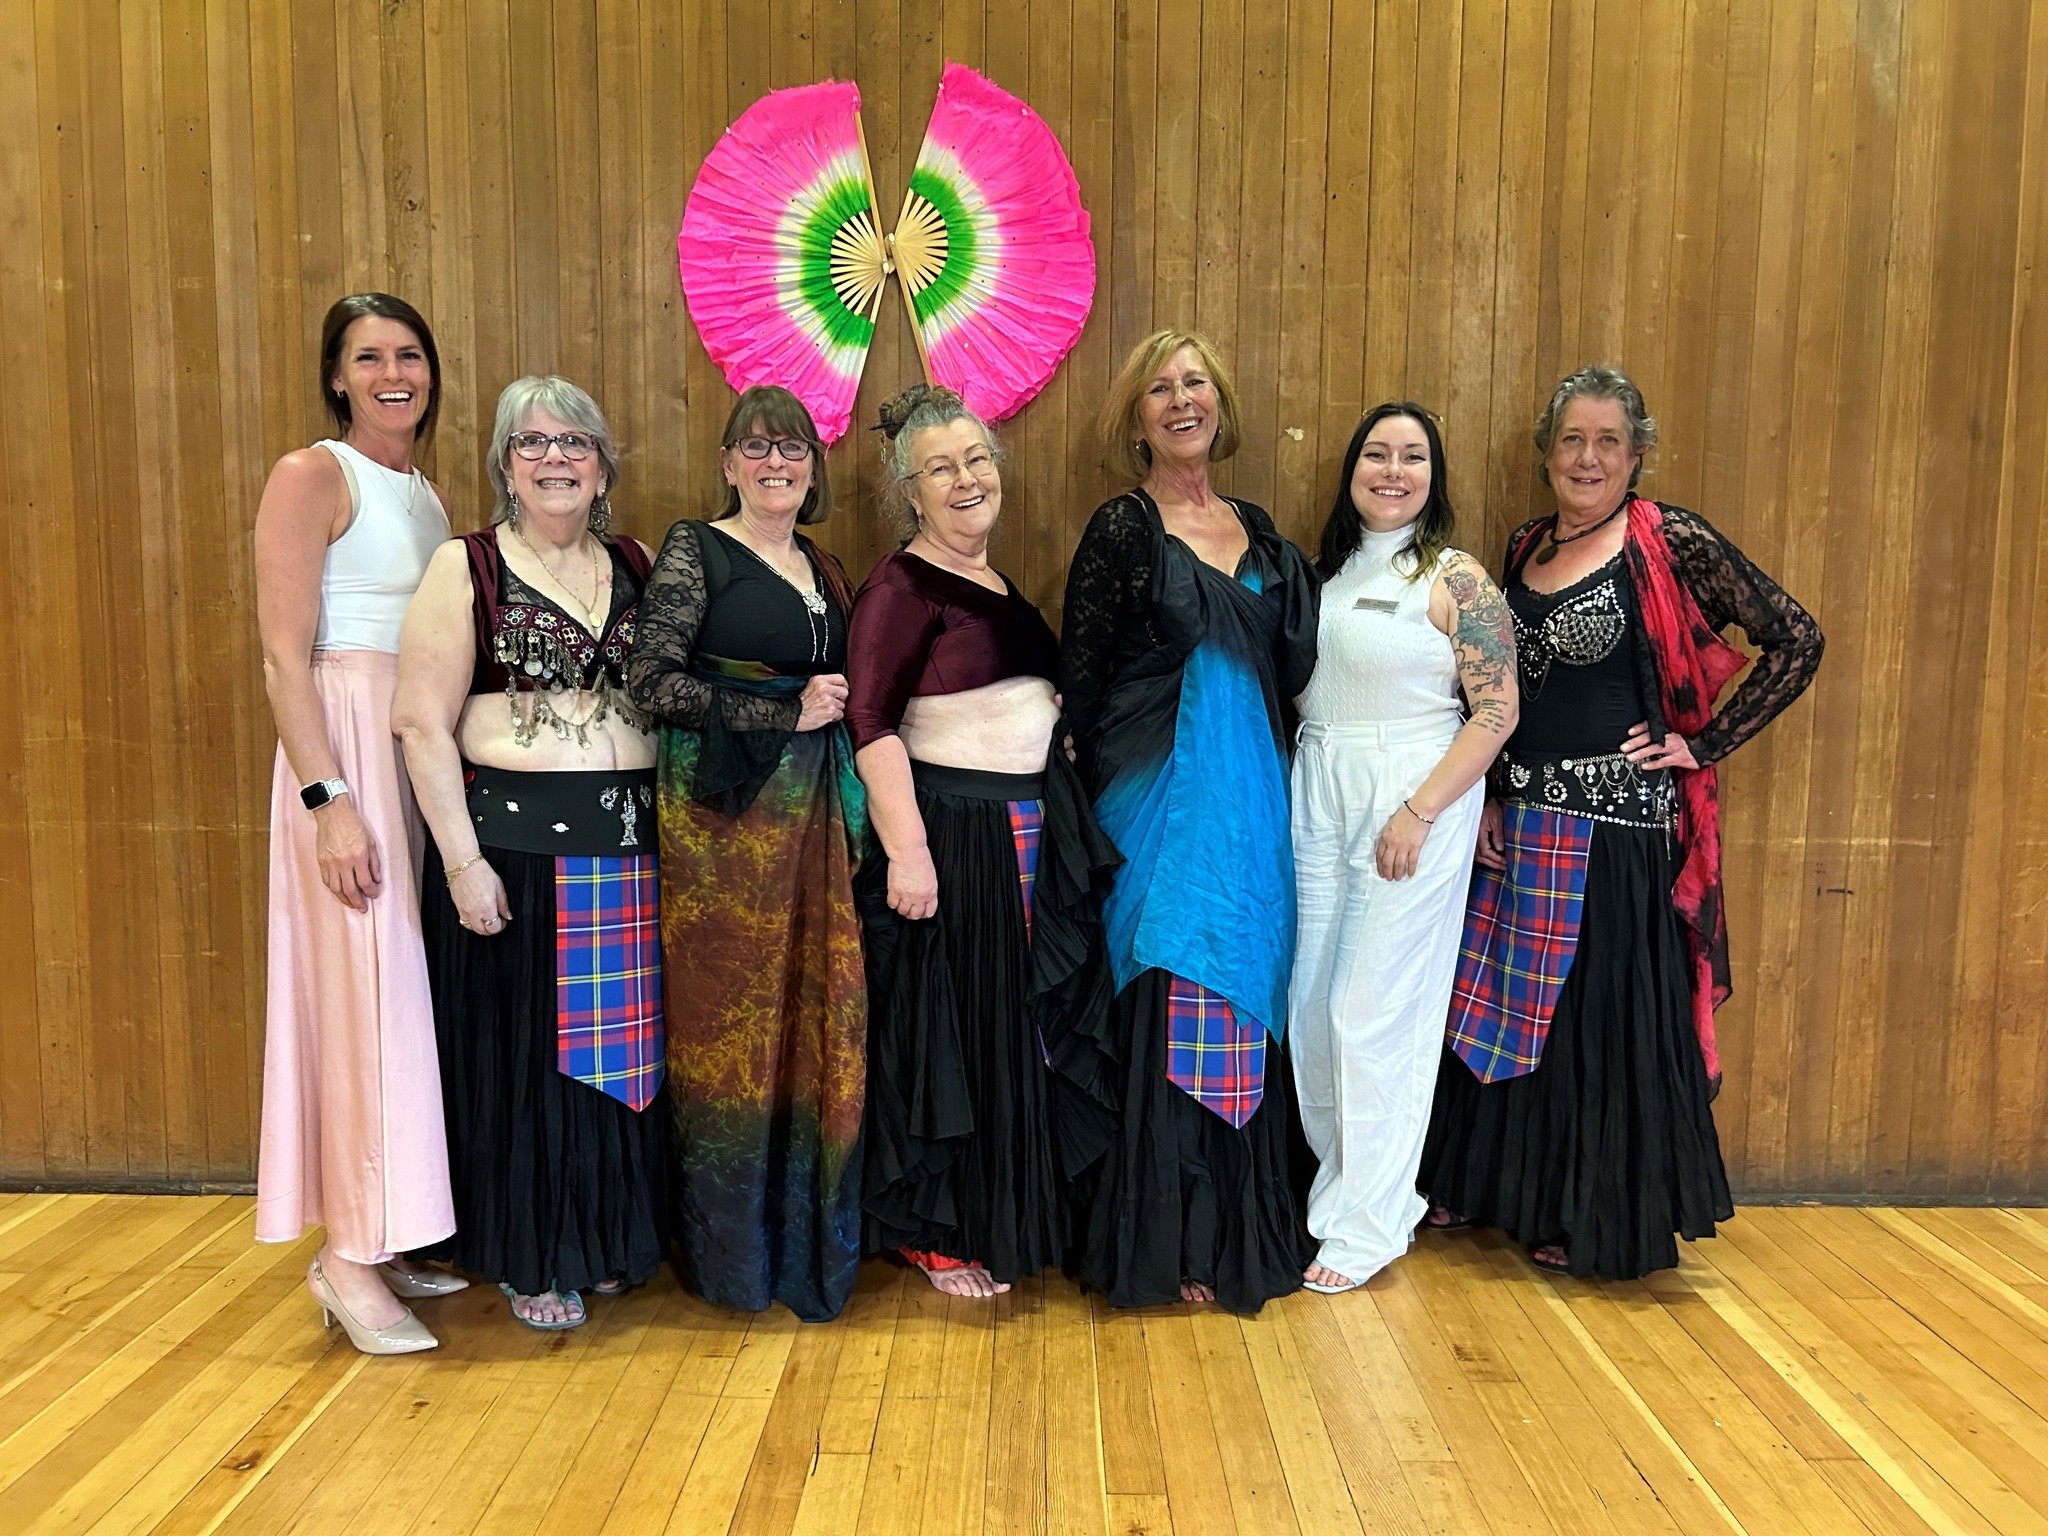 SARA for Women is incredibly grateful to ESP Bellydance for the invitation to the &quot;Return To Ruskin HAFLA&quot; event. We are thrilled that the funds raised will be directed to SARA for Women.

#saraforwomen
#nonprofit
#abbotsfordbc
#missionbc
#